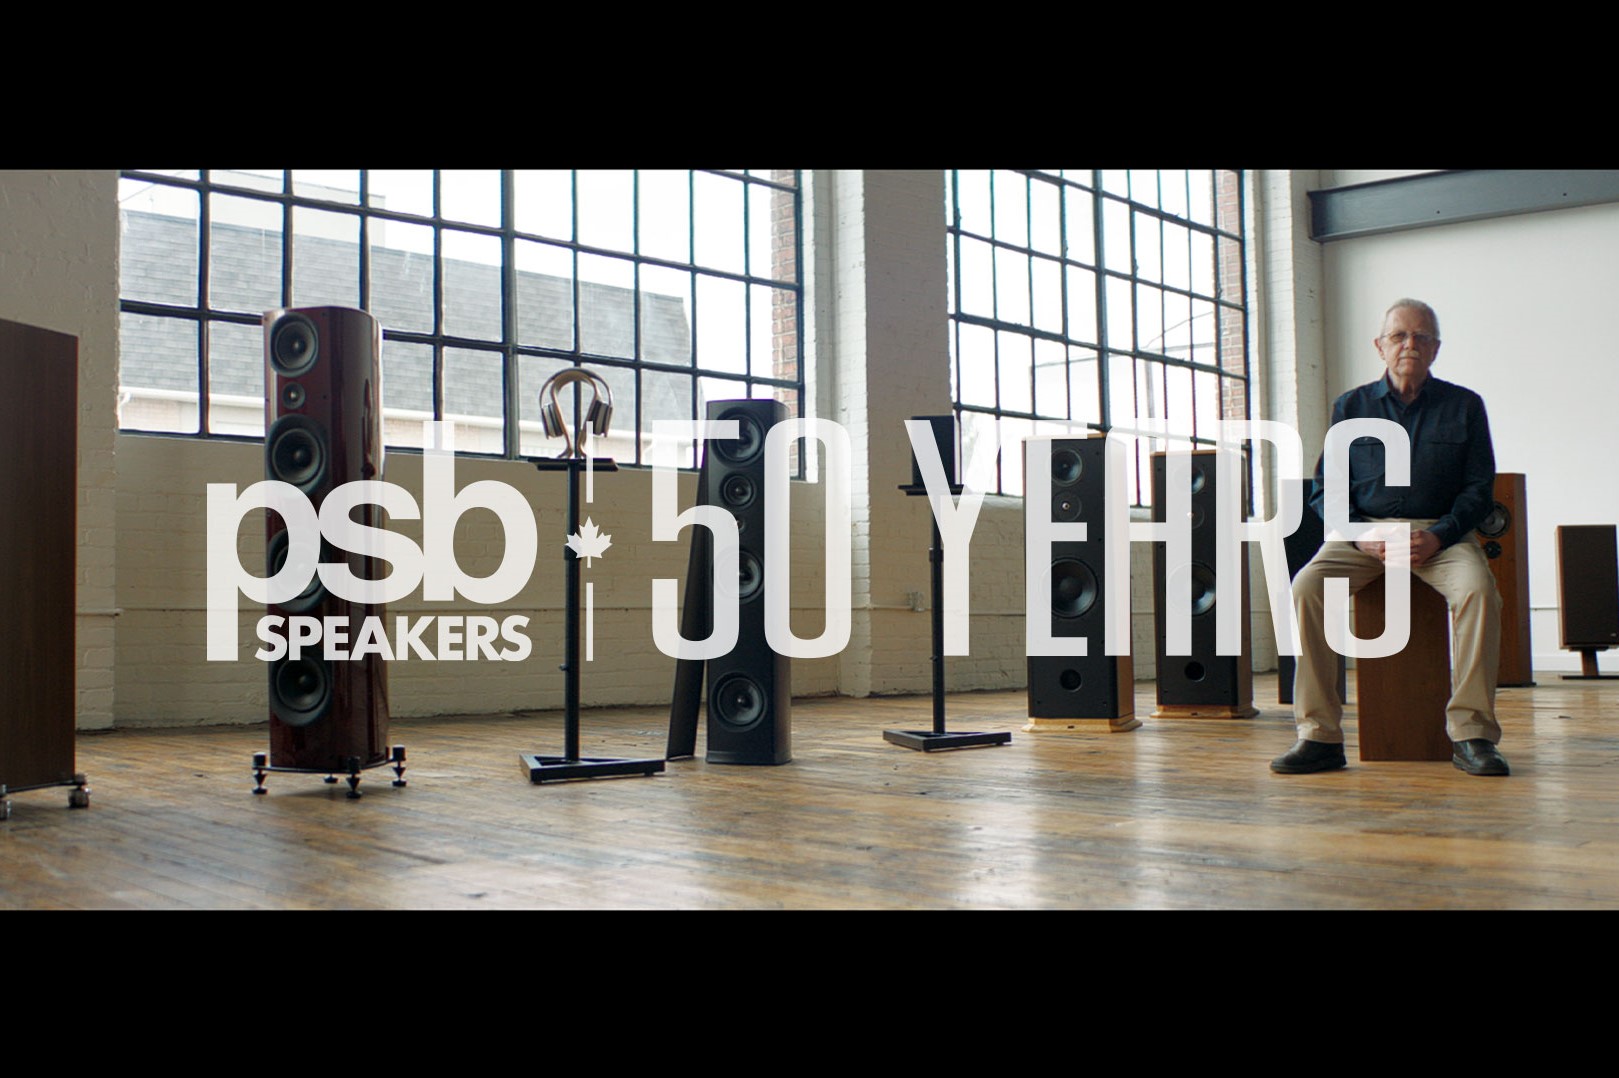 PSB Speakers To Celebrate Their 50 Year Anniversary With A Live Virtual Event